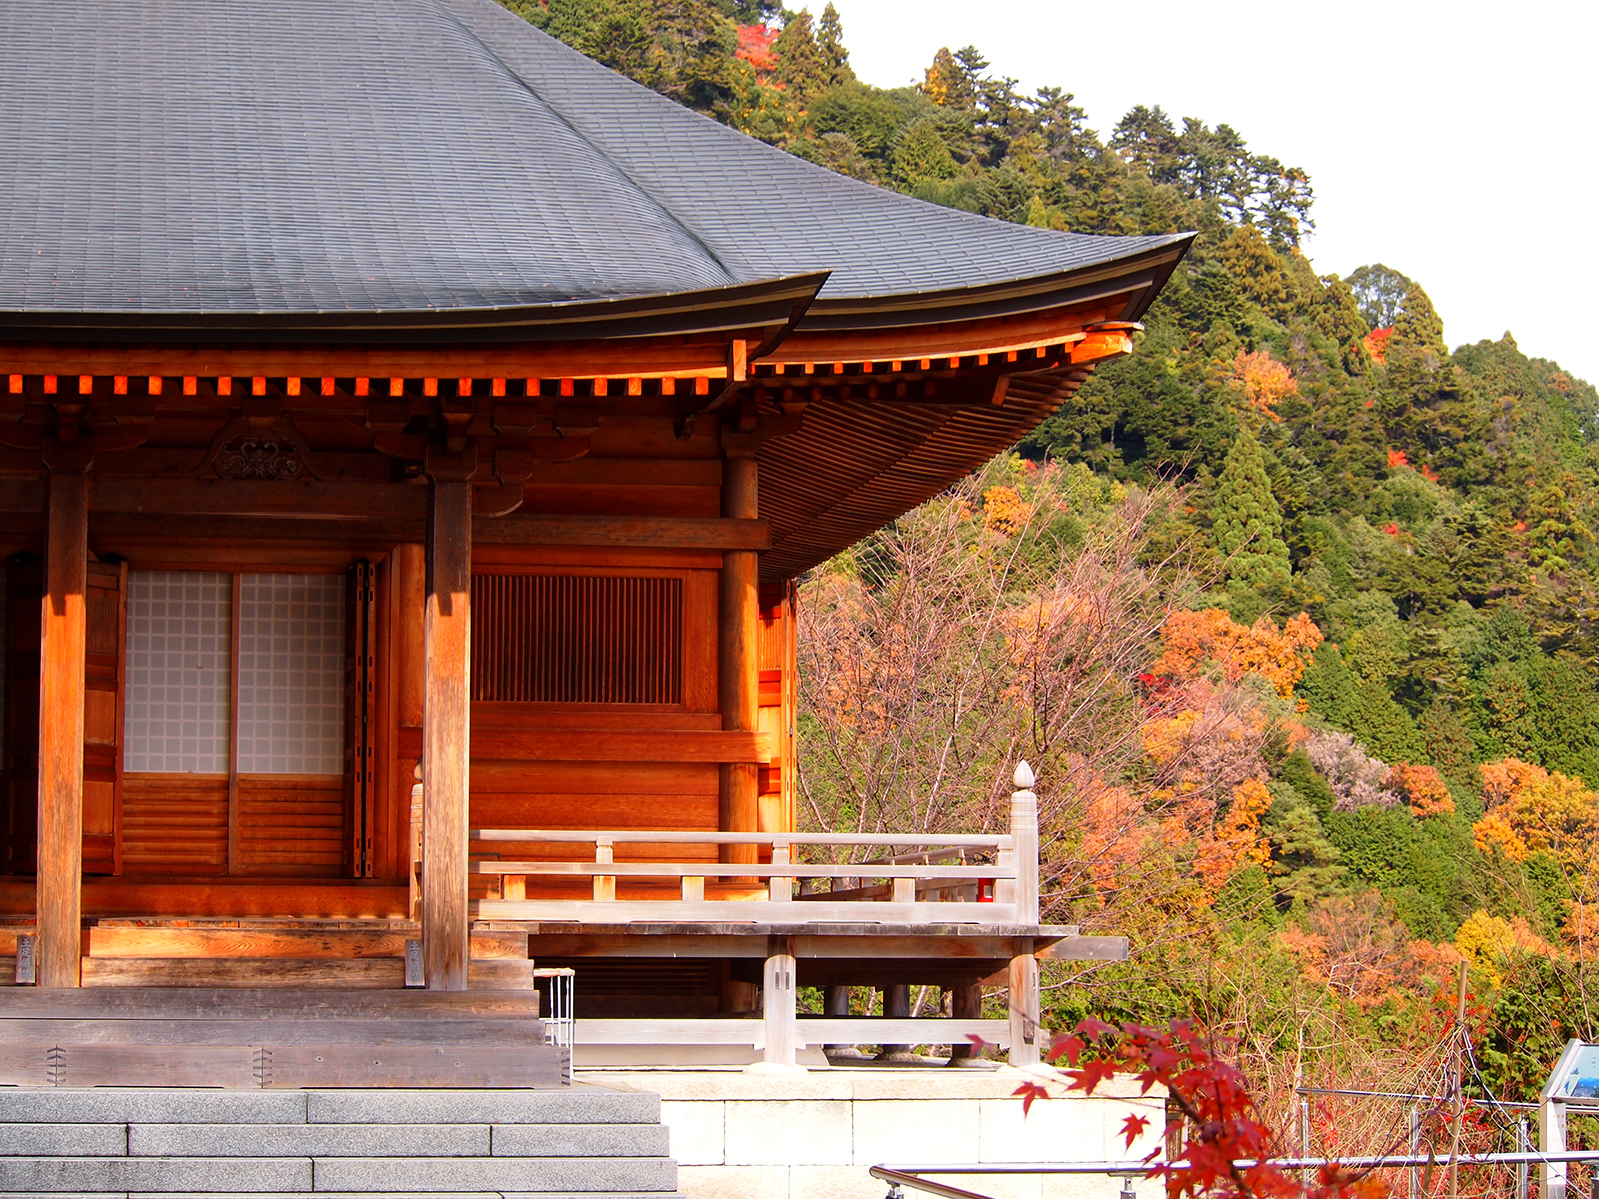 A small temple on Mount Hiei.